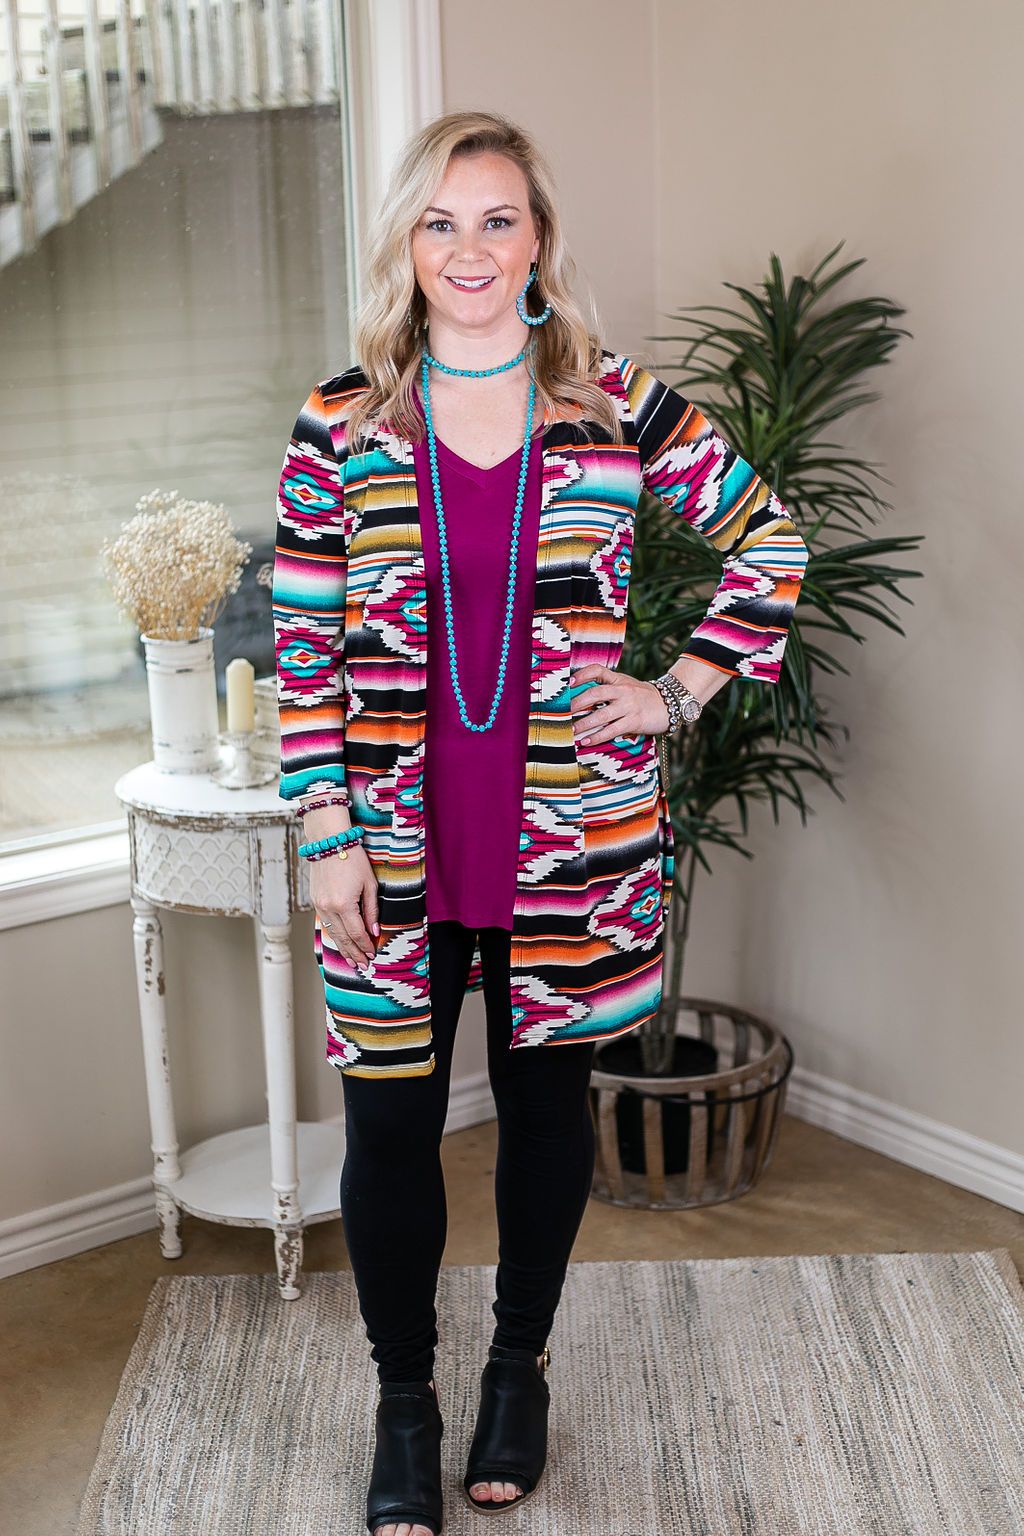 All Eyes On You Aztec Print Cardigan in Magenta and Gold pink and yellow and turquoise cardigan